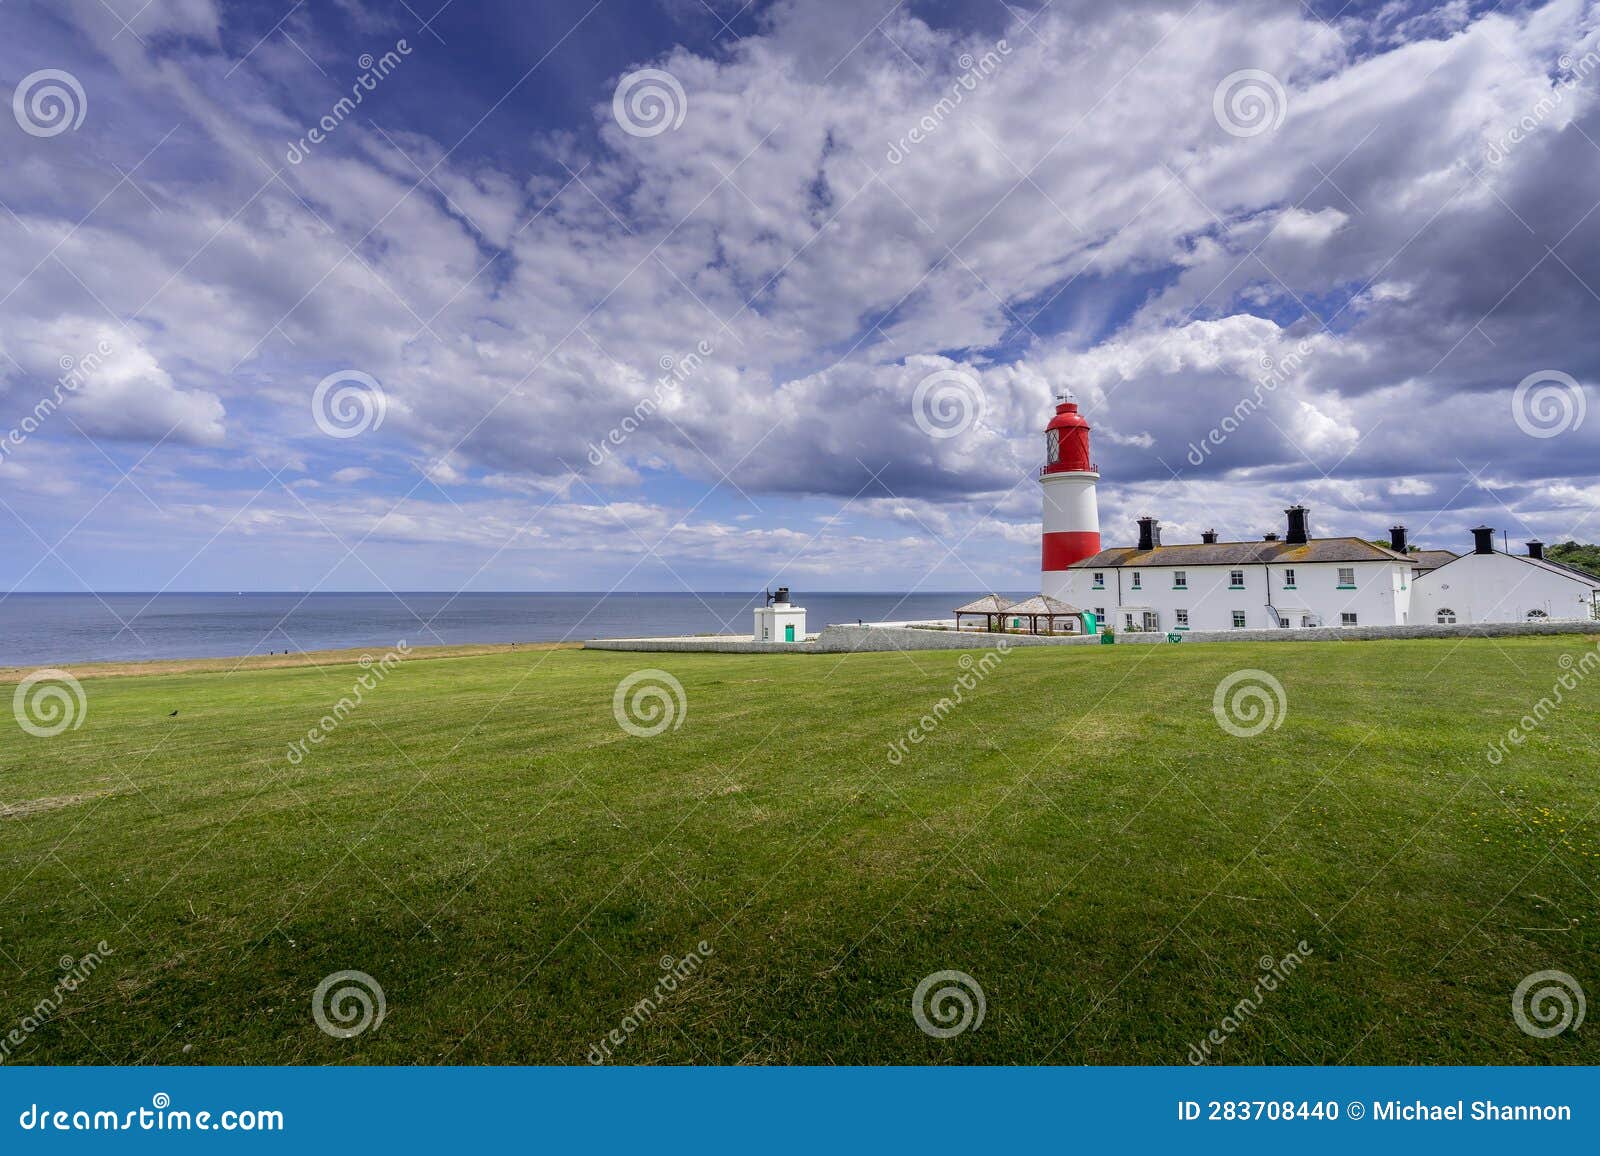 sunlit souther lighthouse and foxhorn building